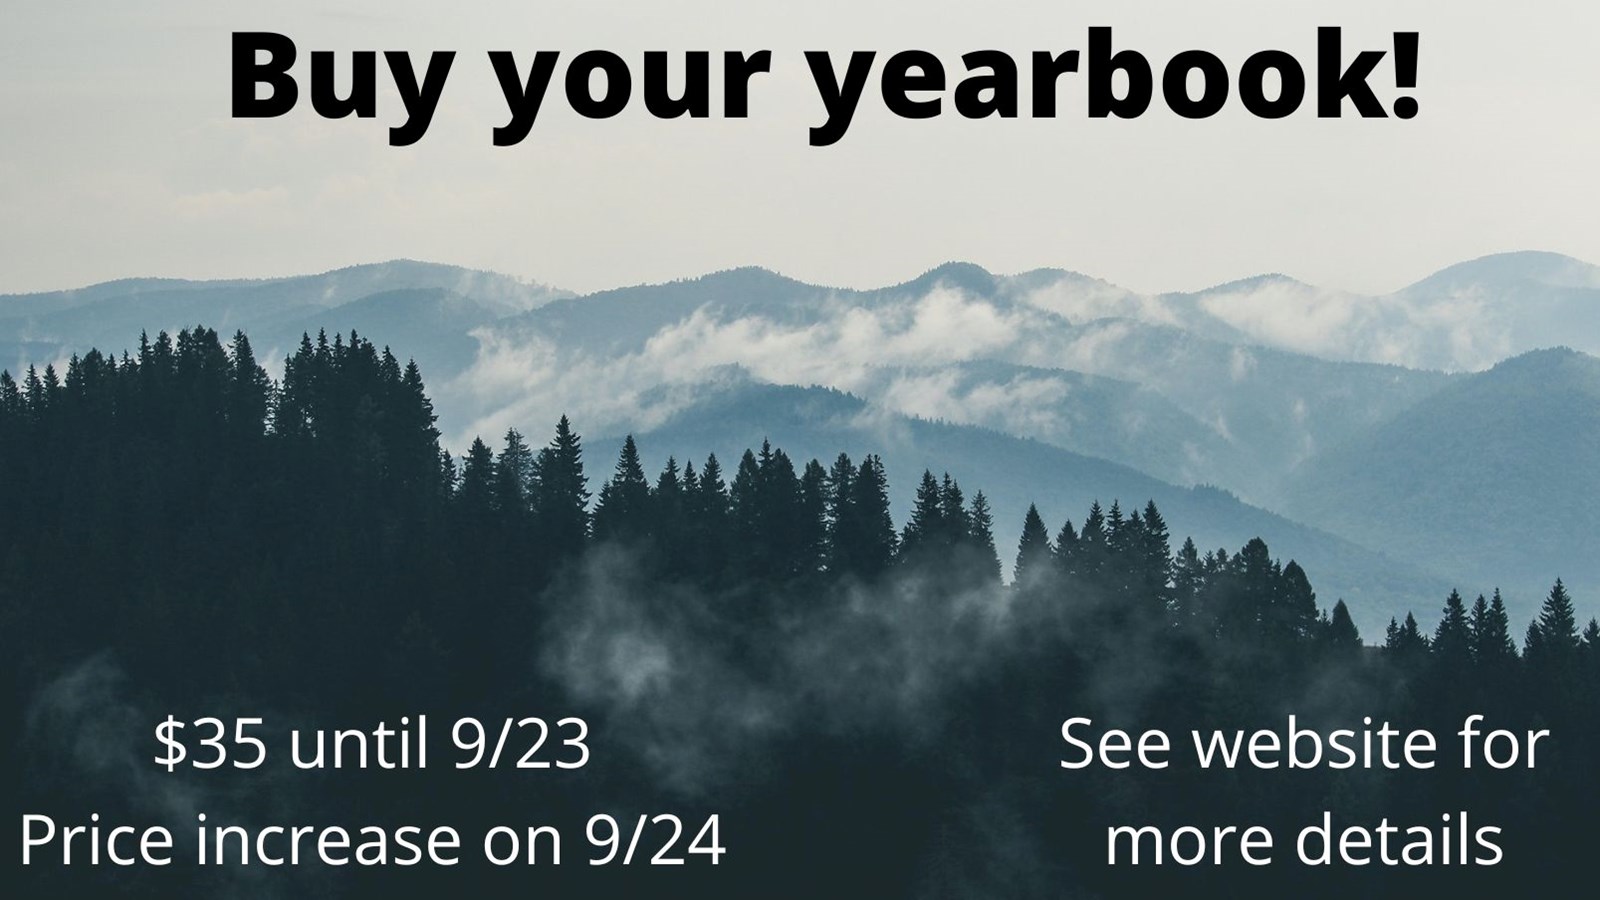 Foggy mountain top "Buy your yearbook"